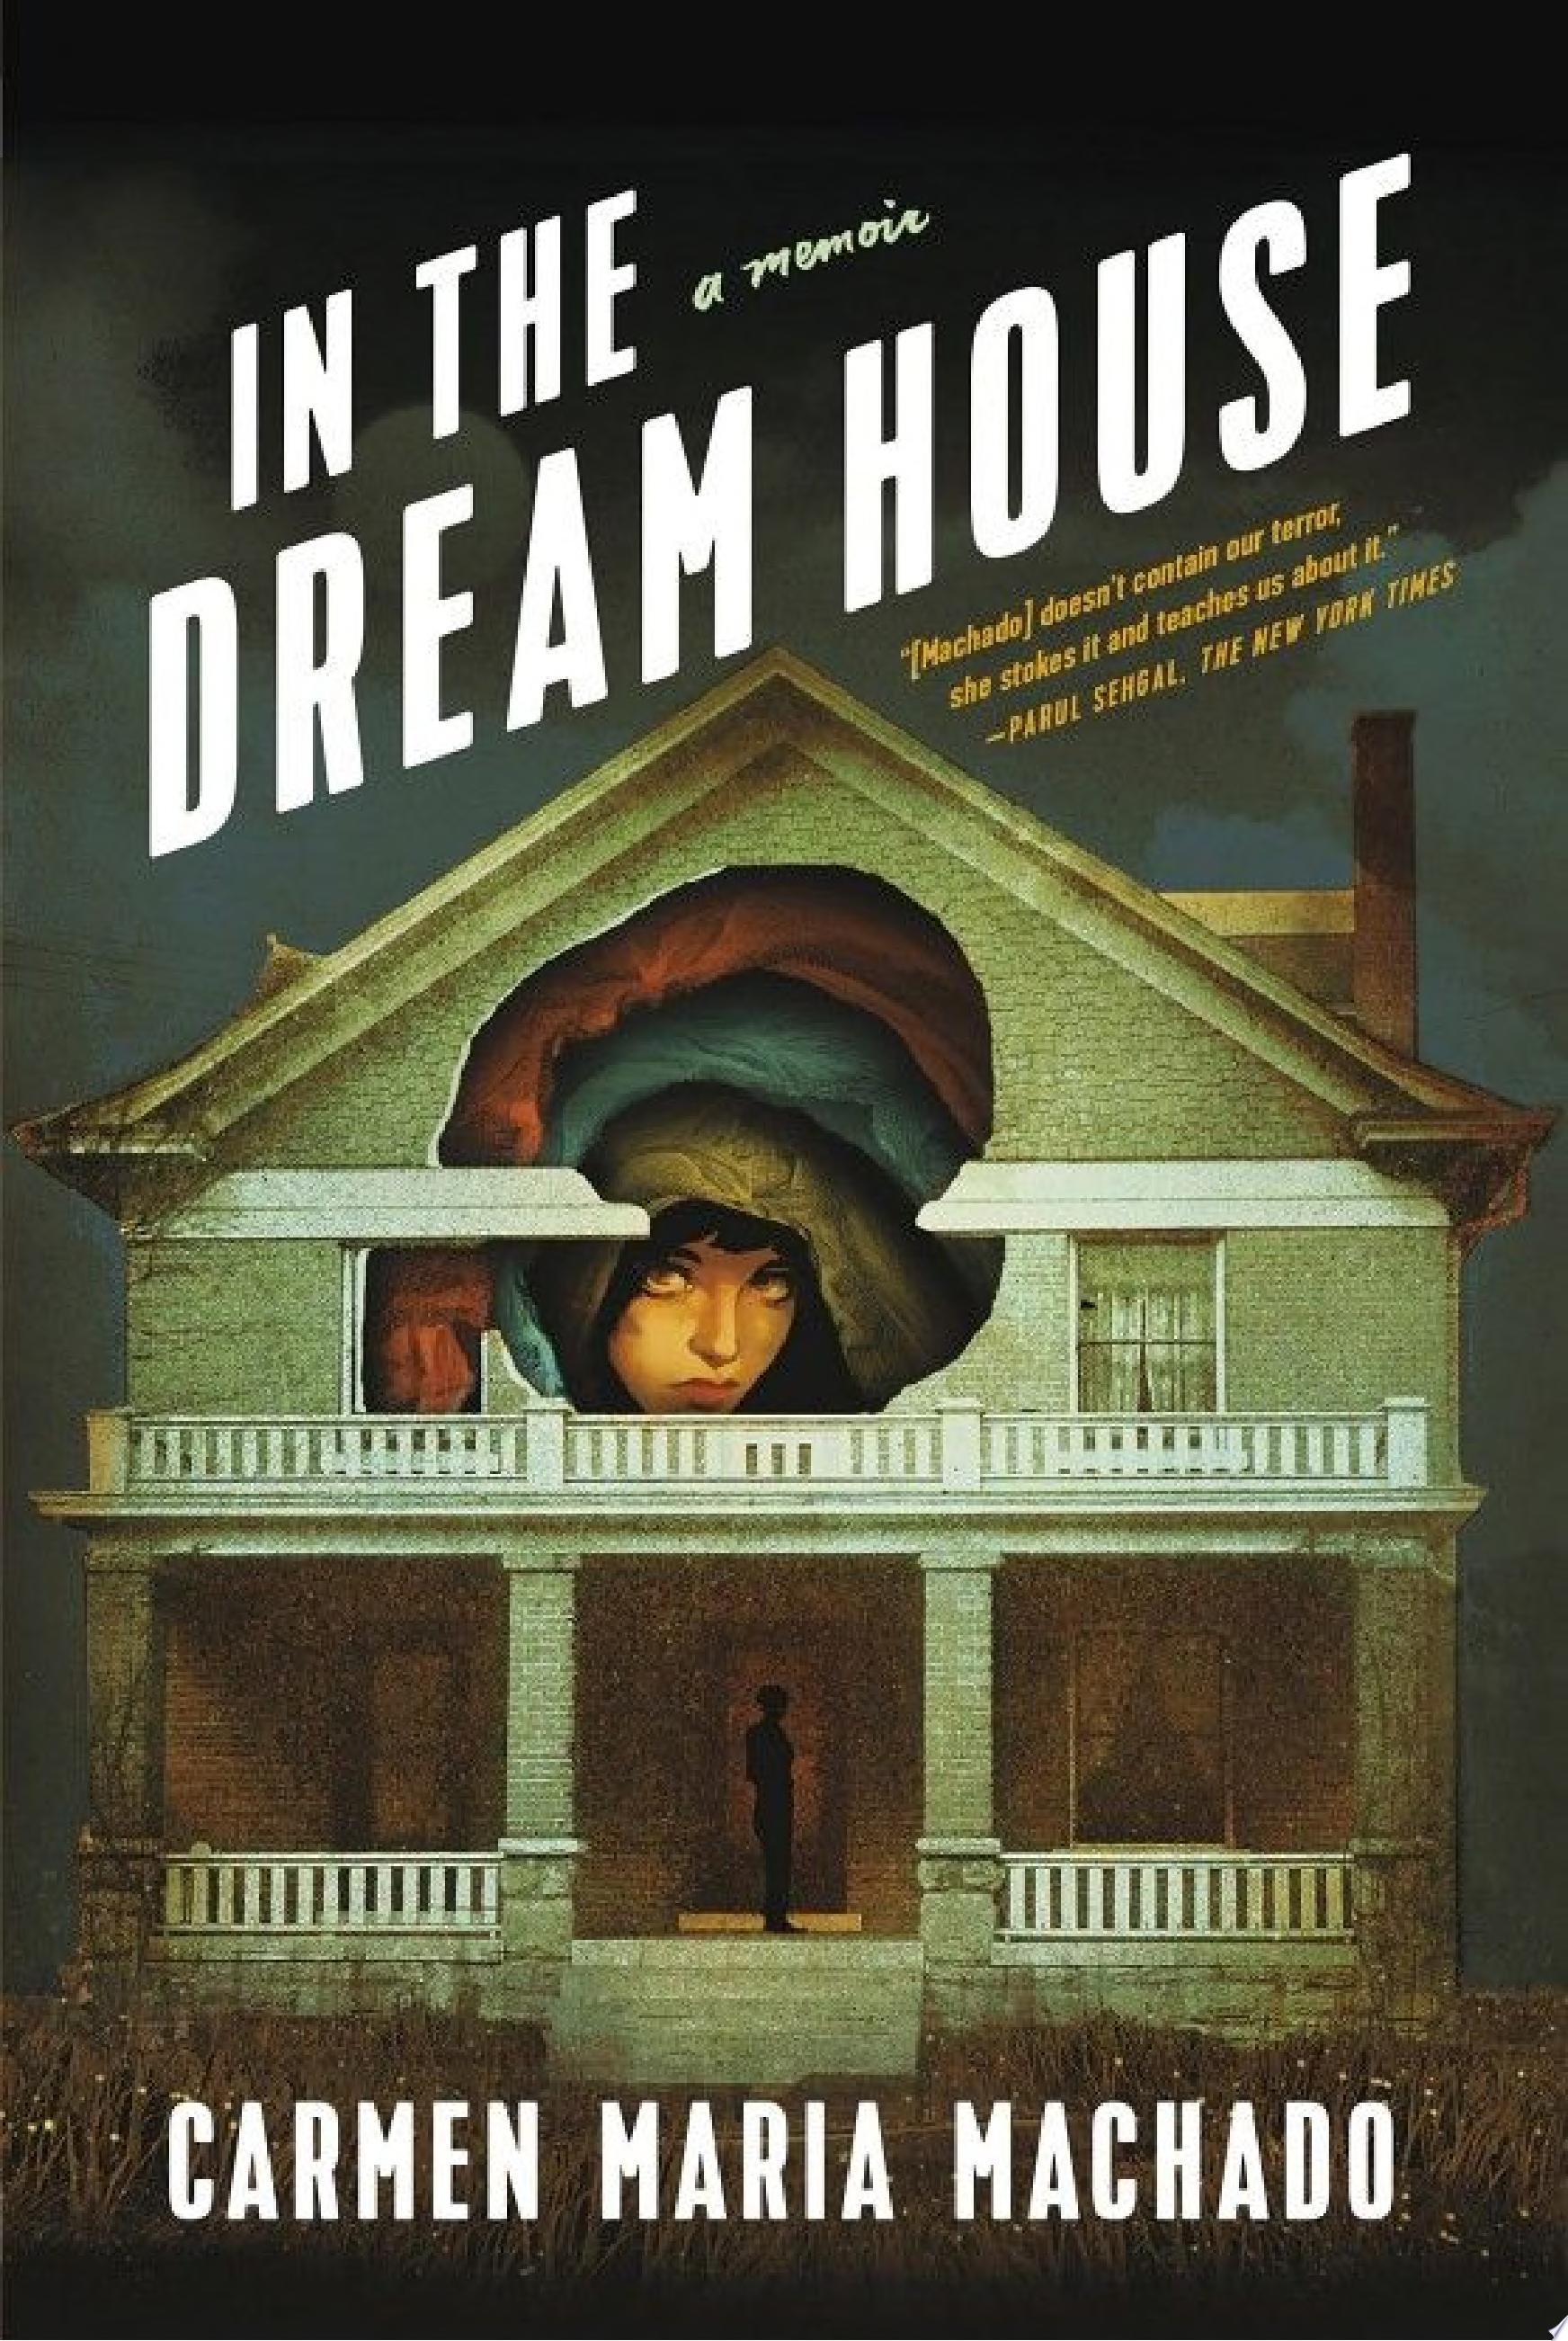 Image for "In the Dream House"